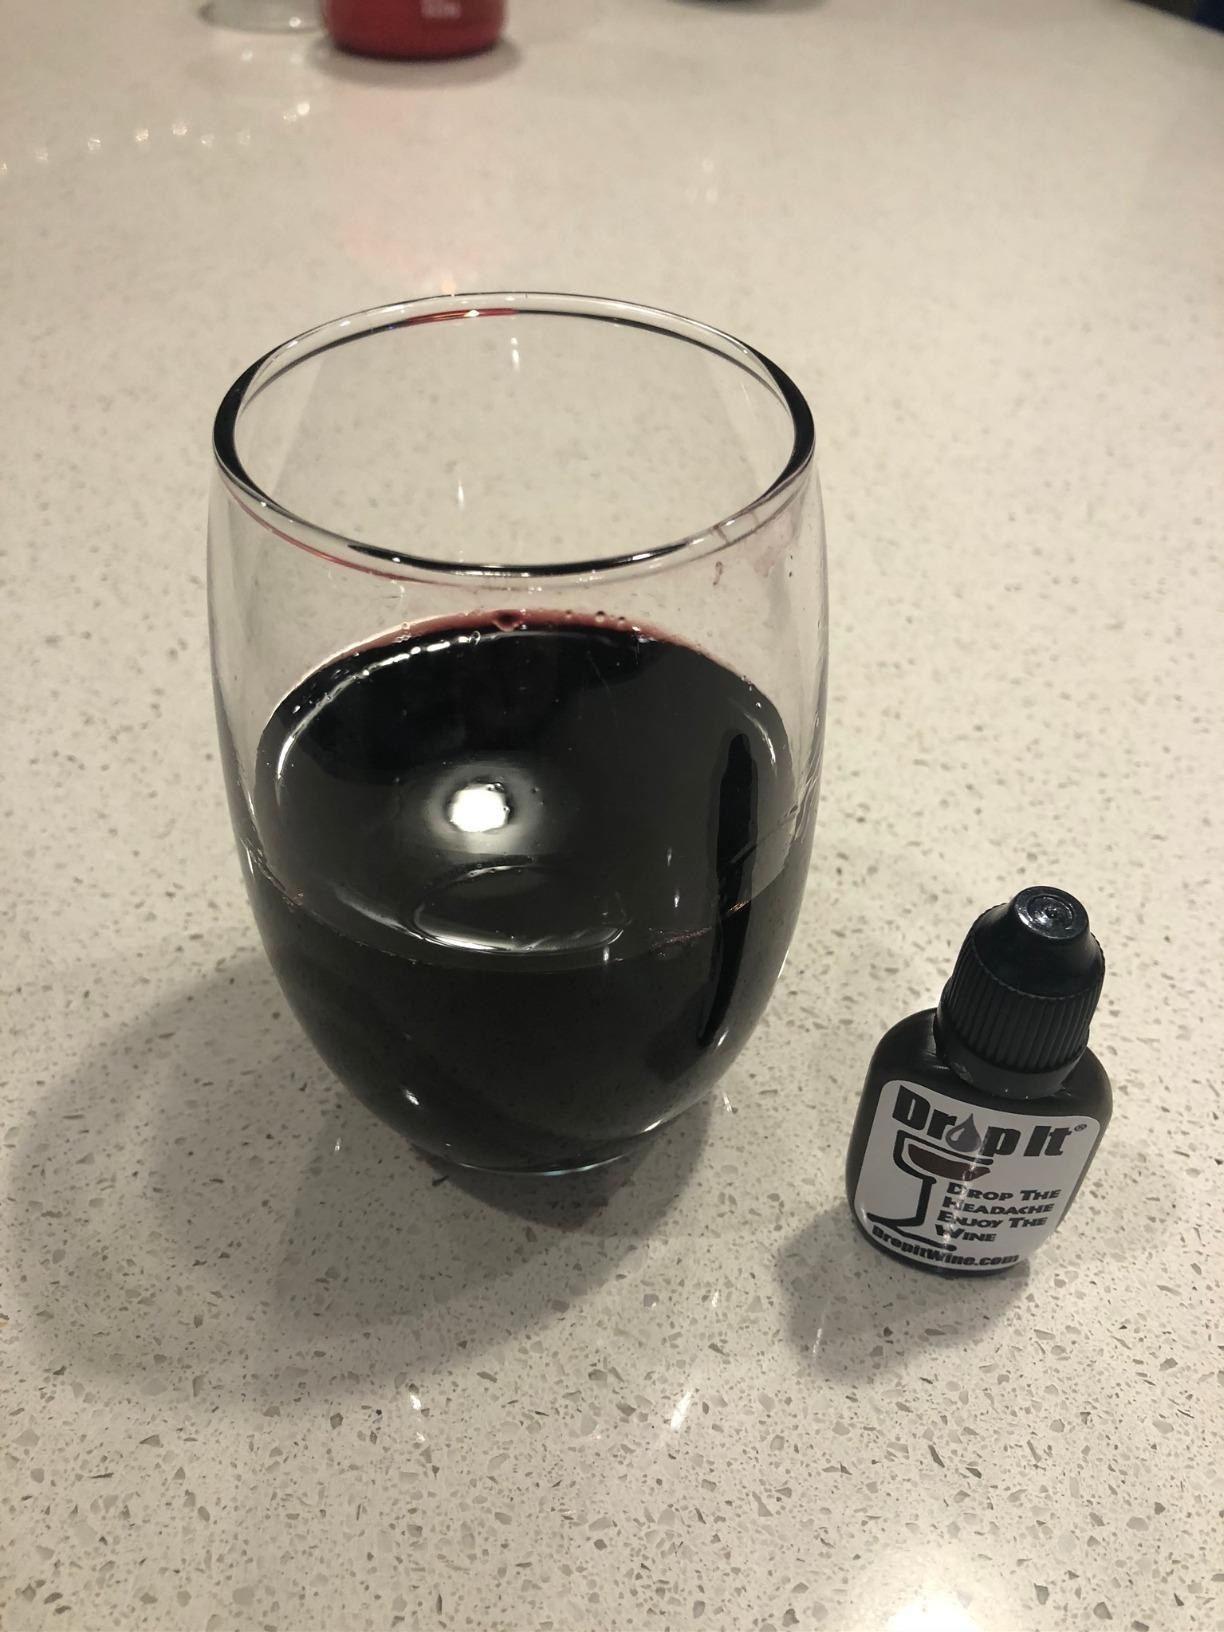 reviewer image of a glass of red wine next to a bottle of Drop It